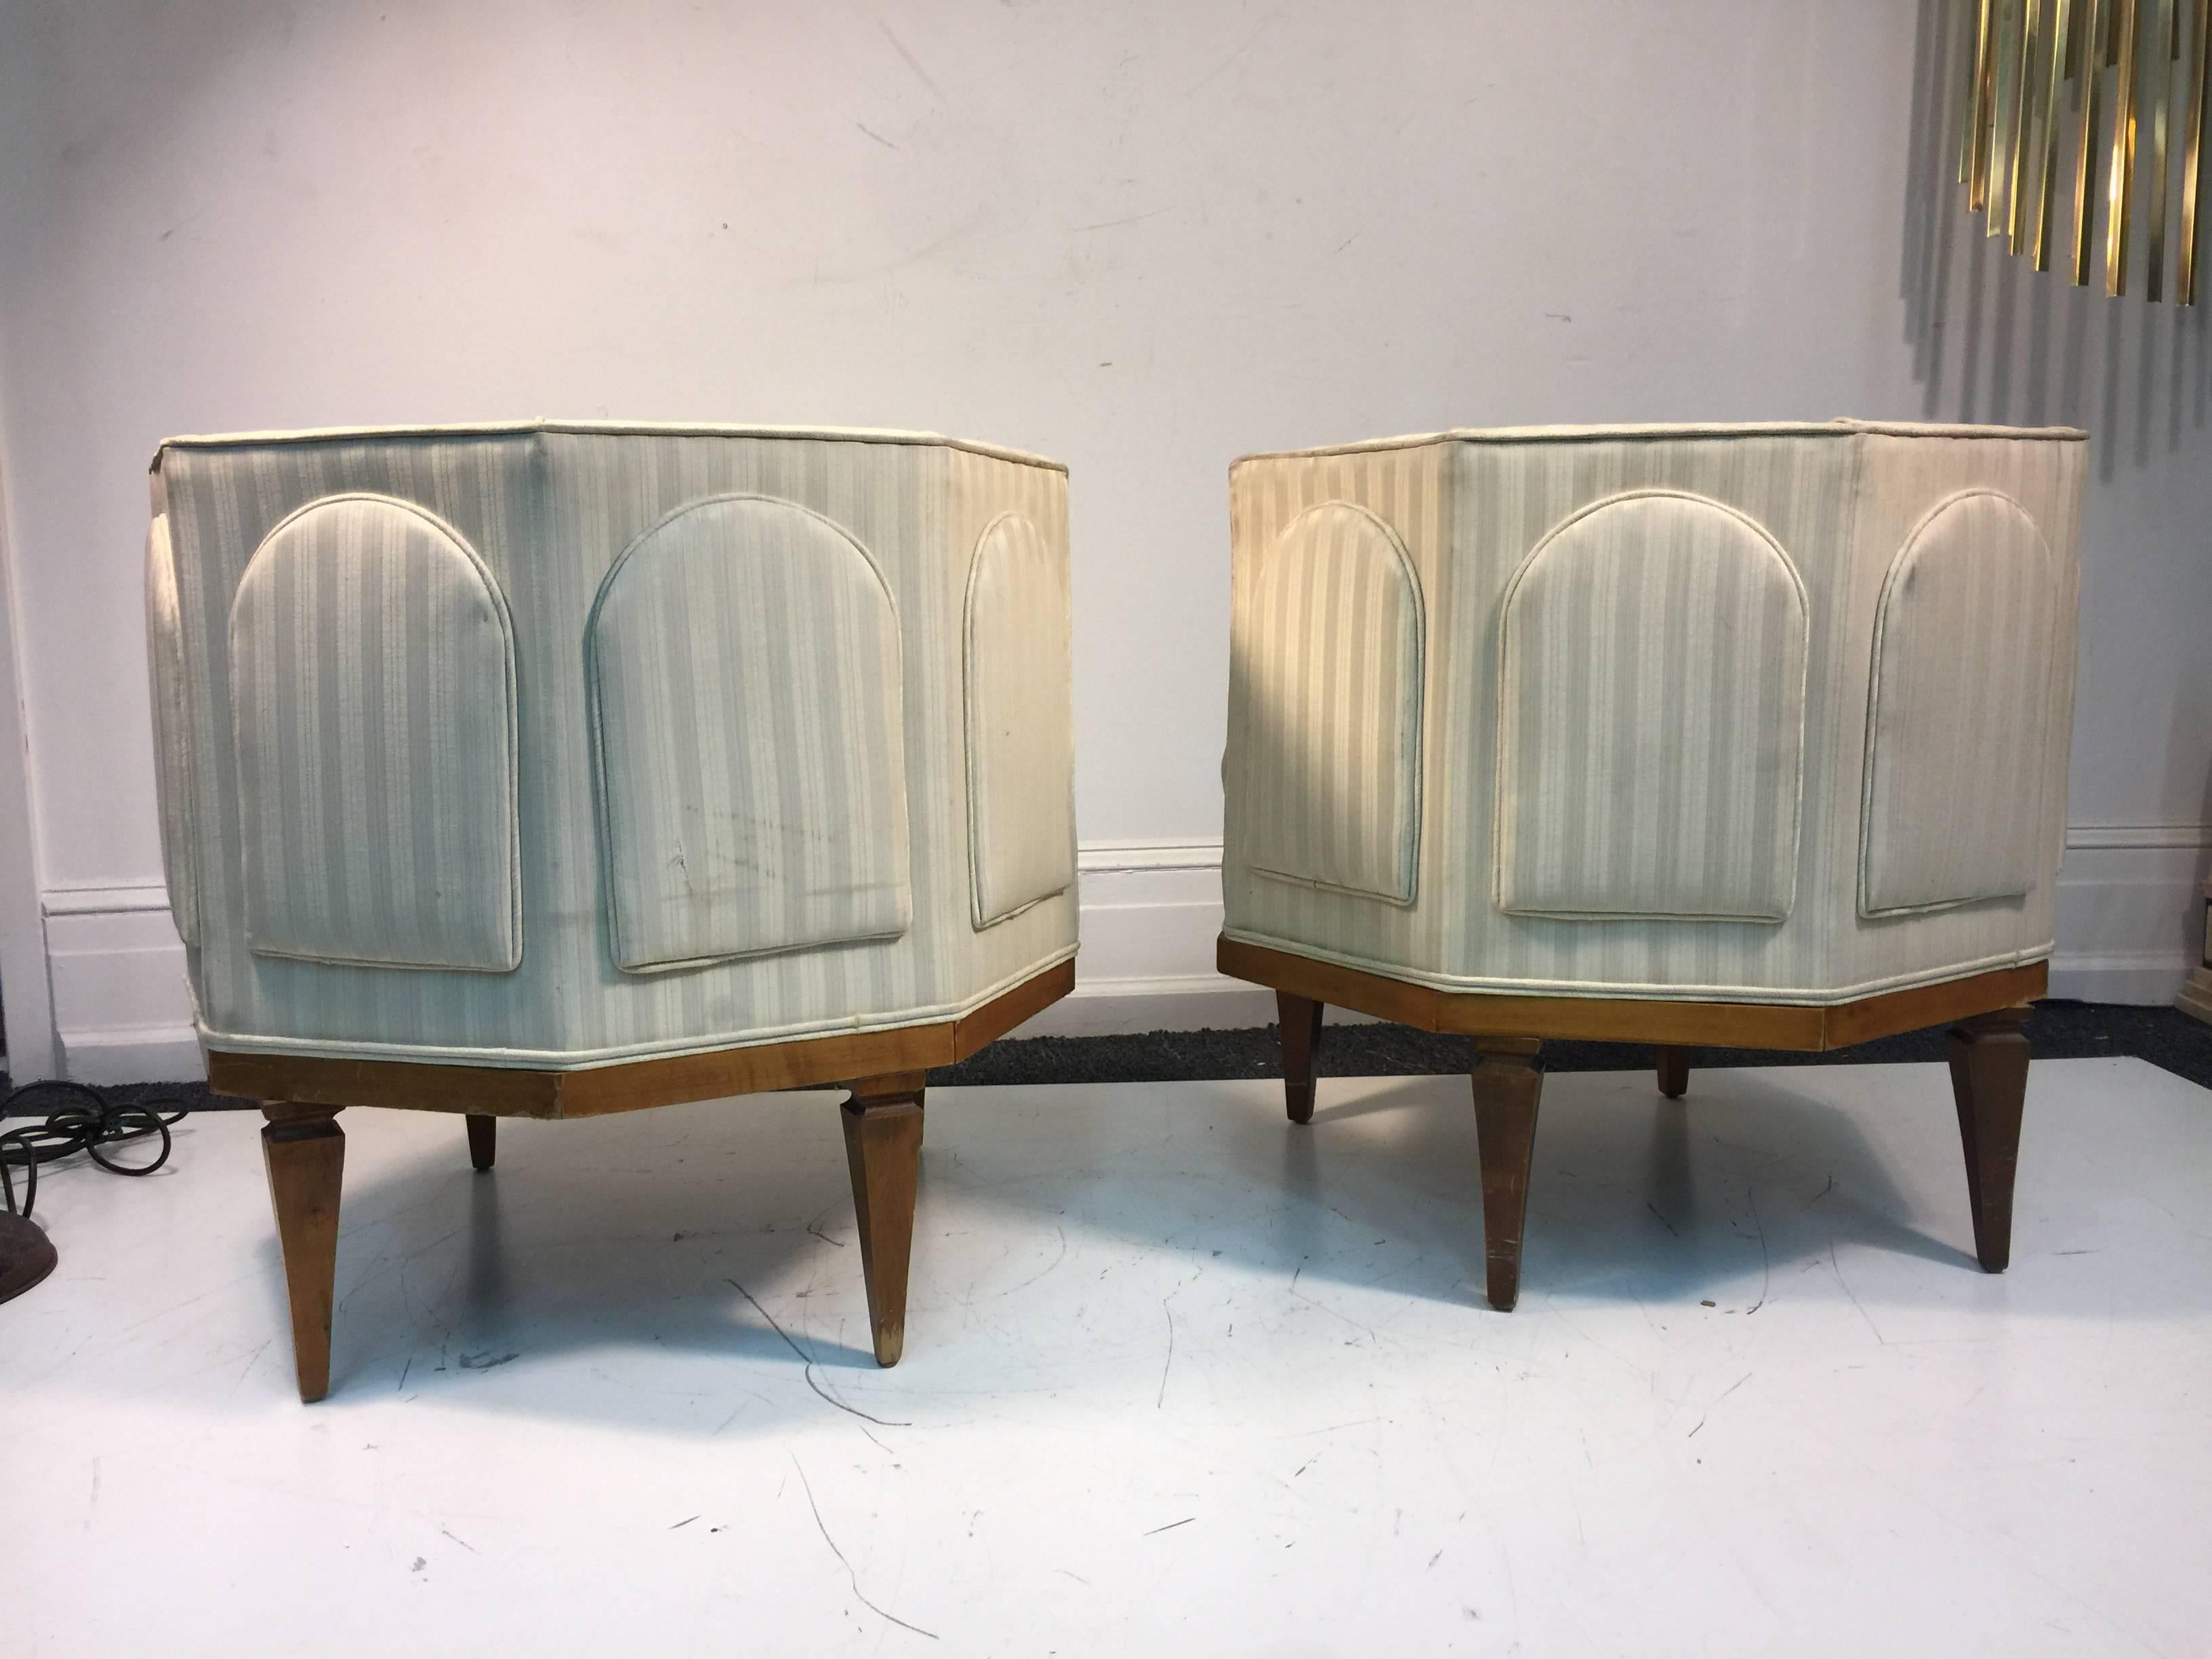 20th Century Rare Pair of Regency Style Club or Slipper Chairs in the Manner of Parzinger For Sale